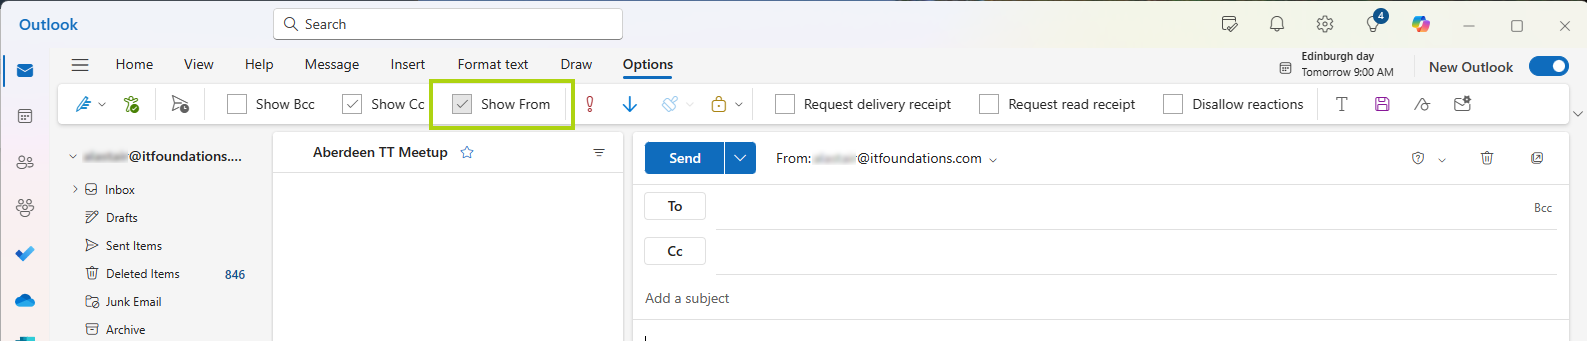 how-to-find-your-shared-mailboxes-in-the-new-outlook-2